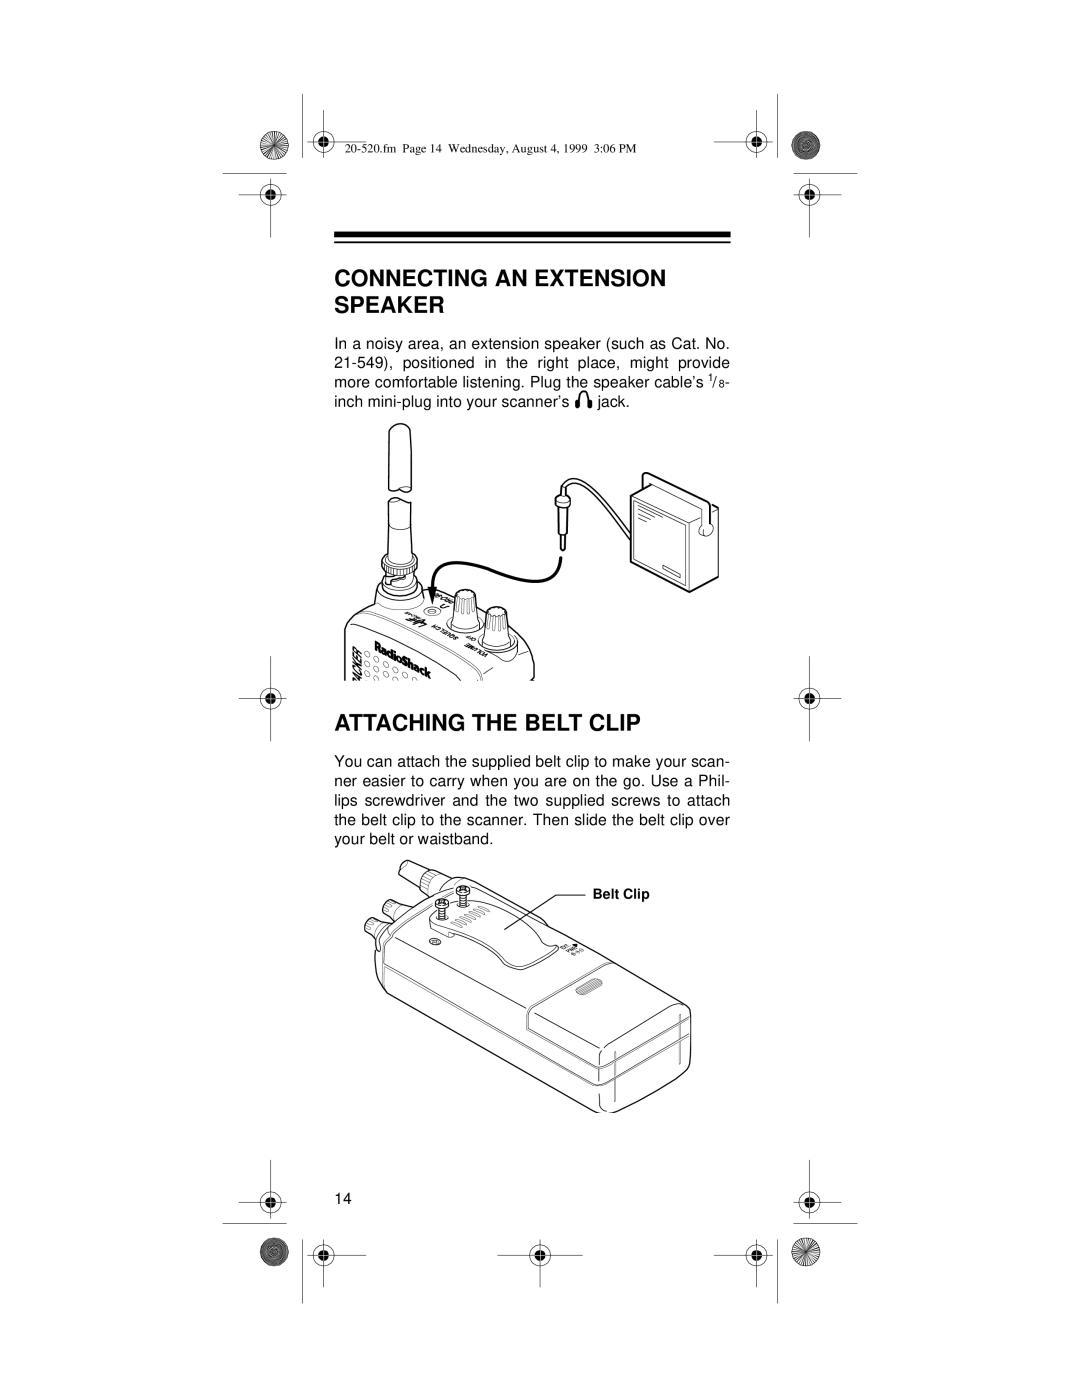 Radio Shack PRO-90 owner manual Connecting An Extension Speaker, Attaching The Belt Clip 